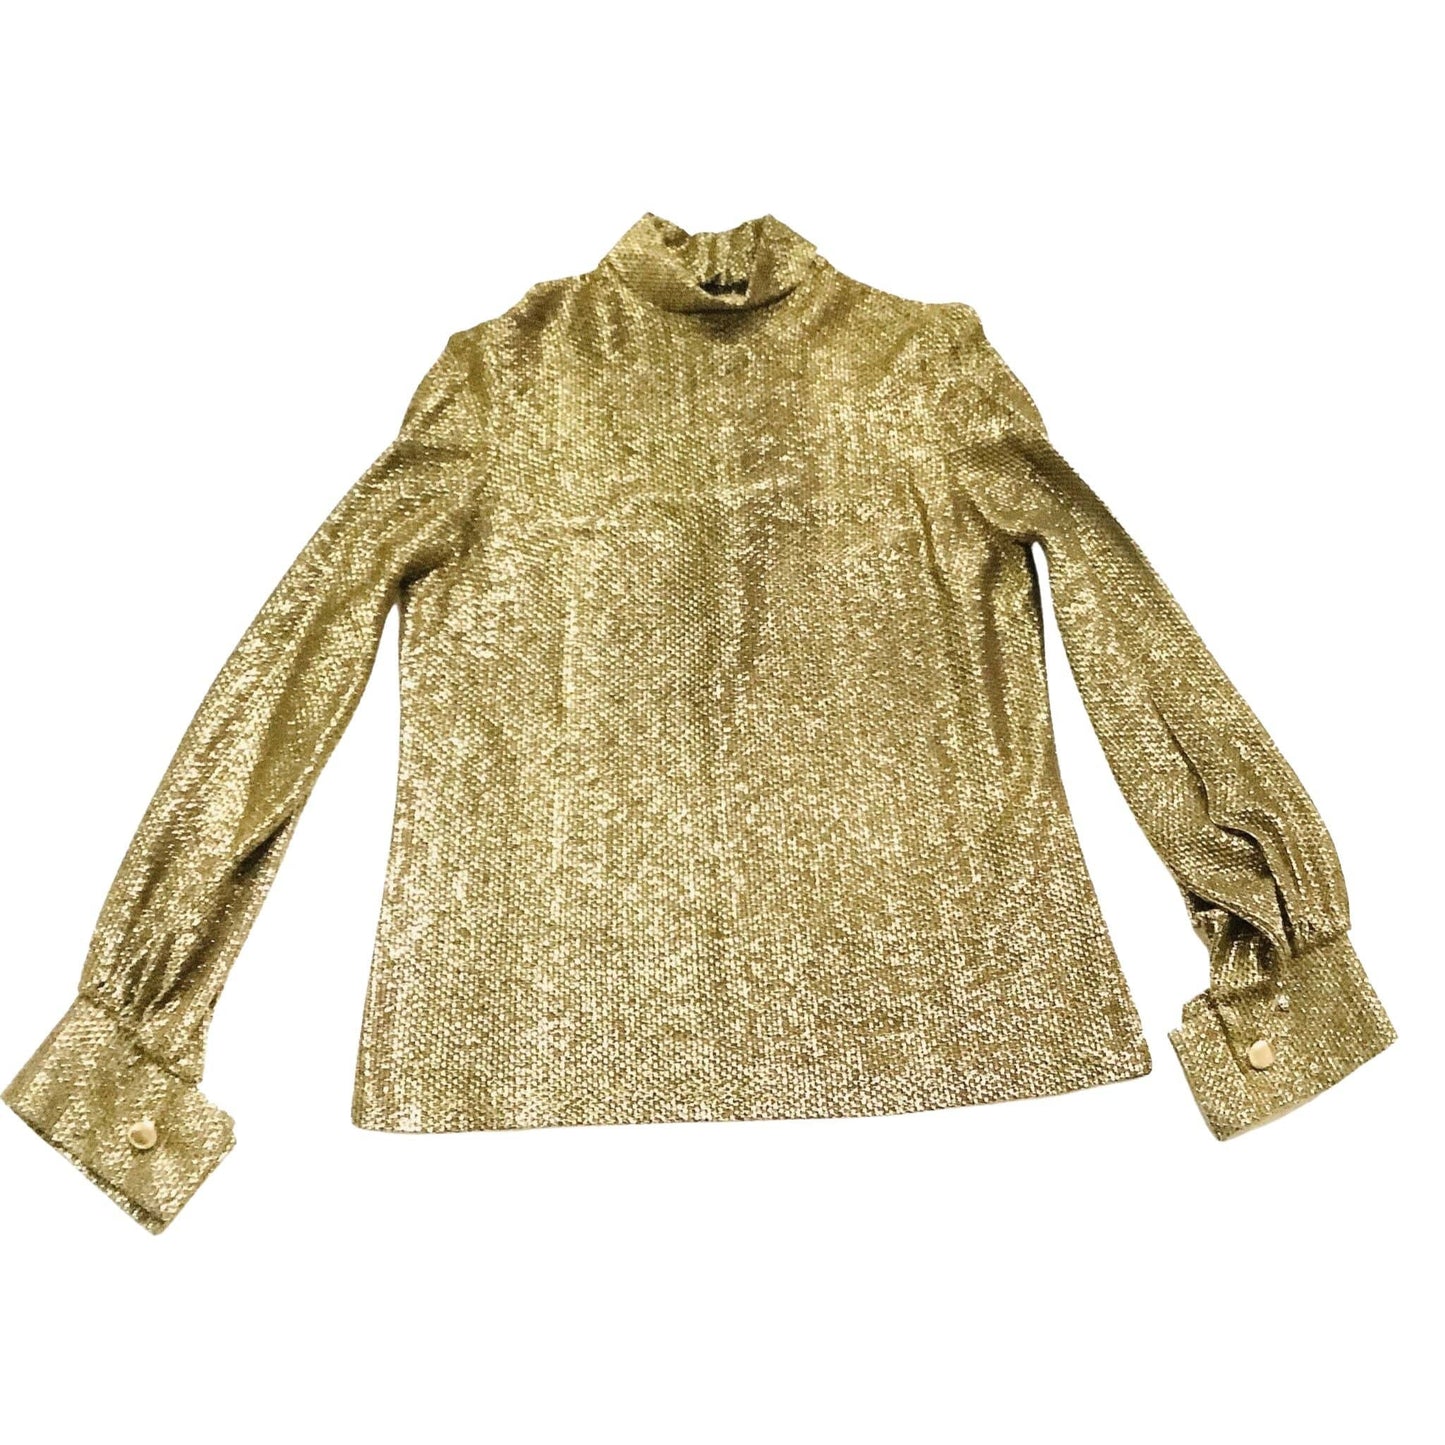 Vintage Metallic Gold Top Small / Gold / Vintage 1960s